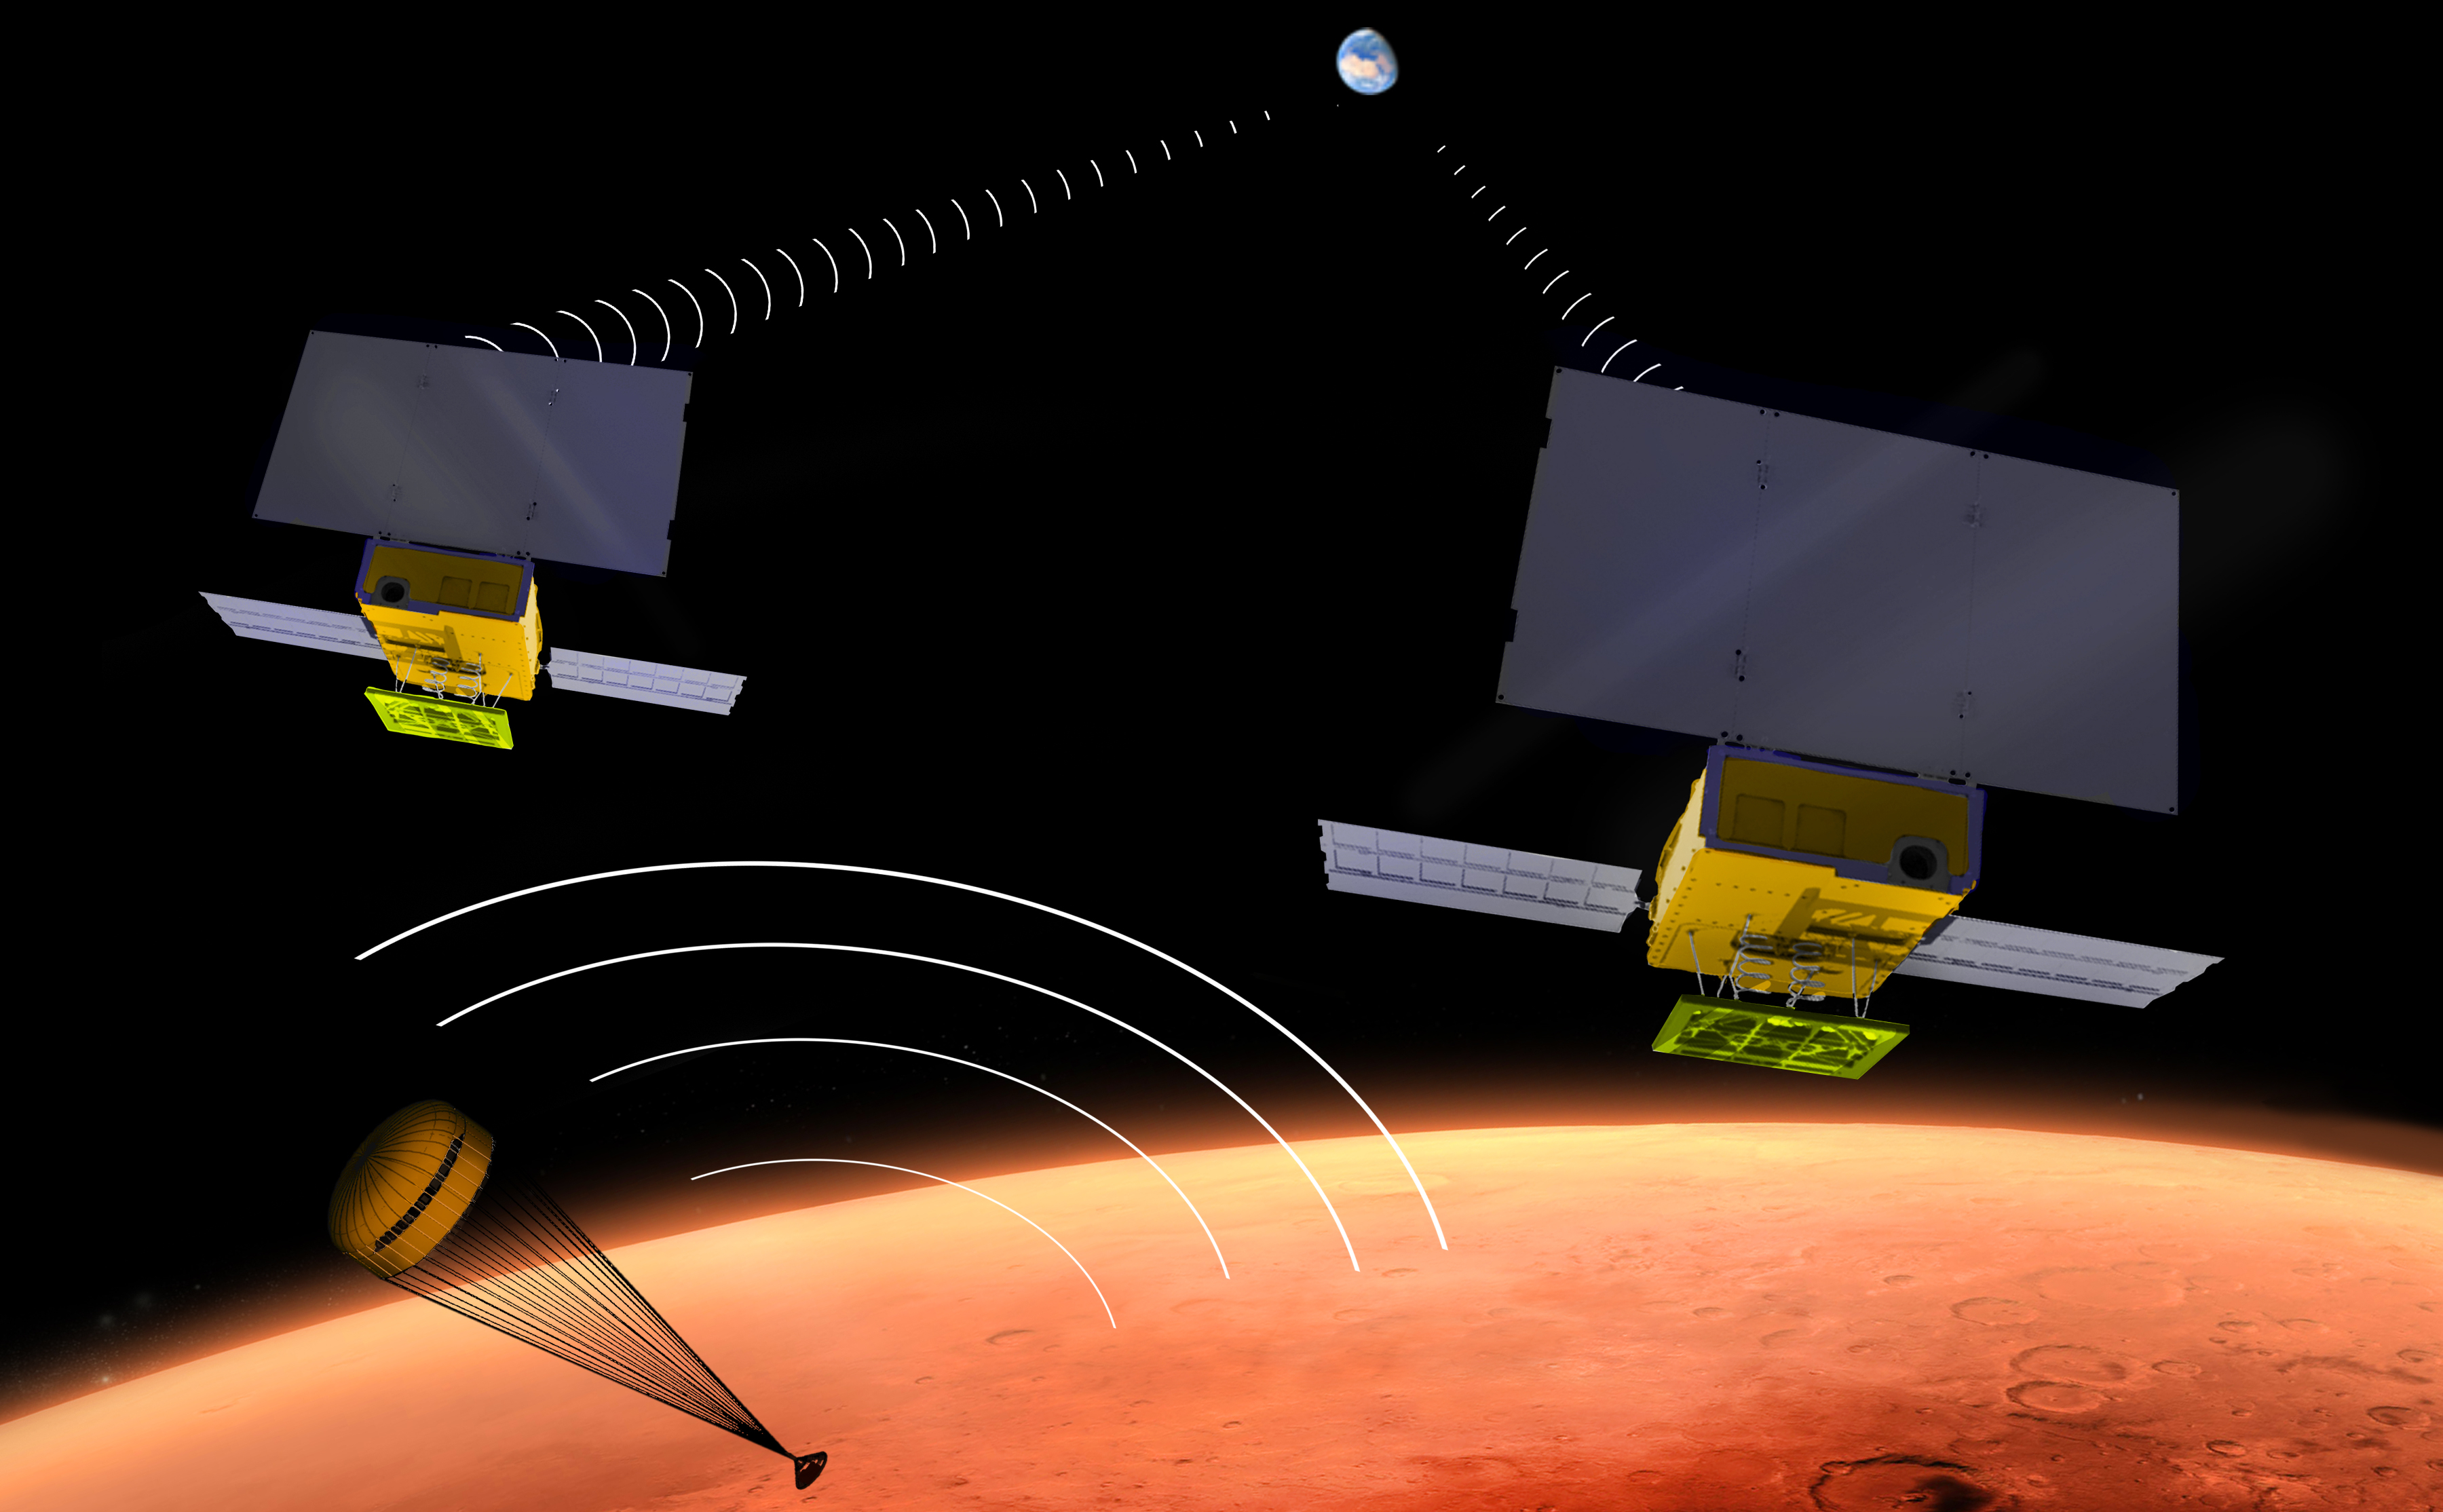 Artist's concept showing two small satellites flying over Mars as the InSight lander parachutes through the surface of Mars.